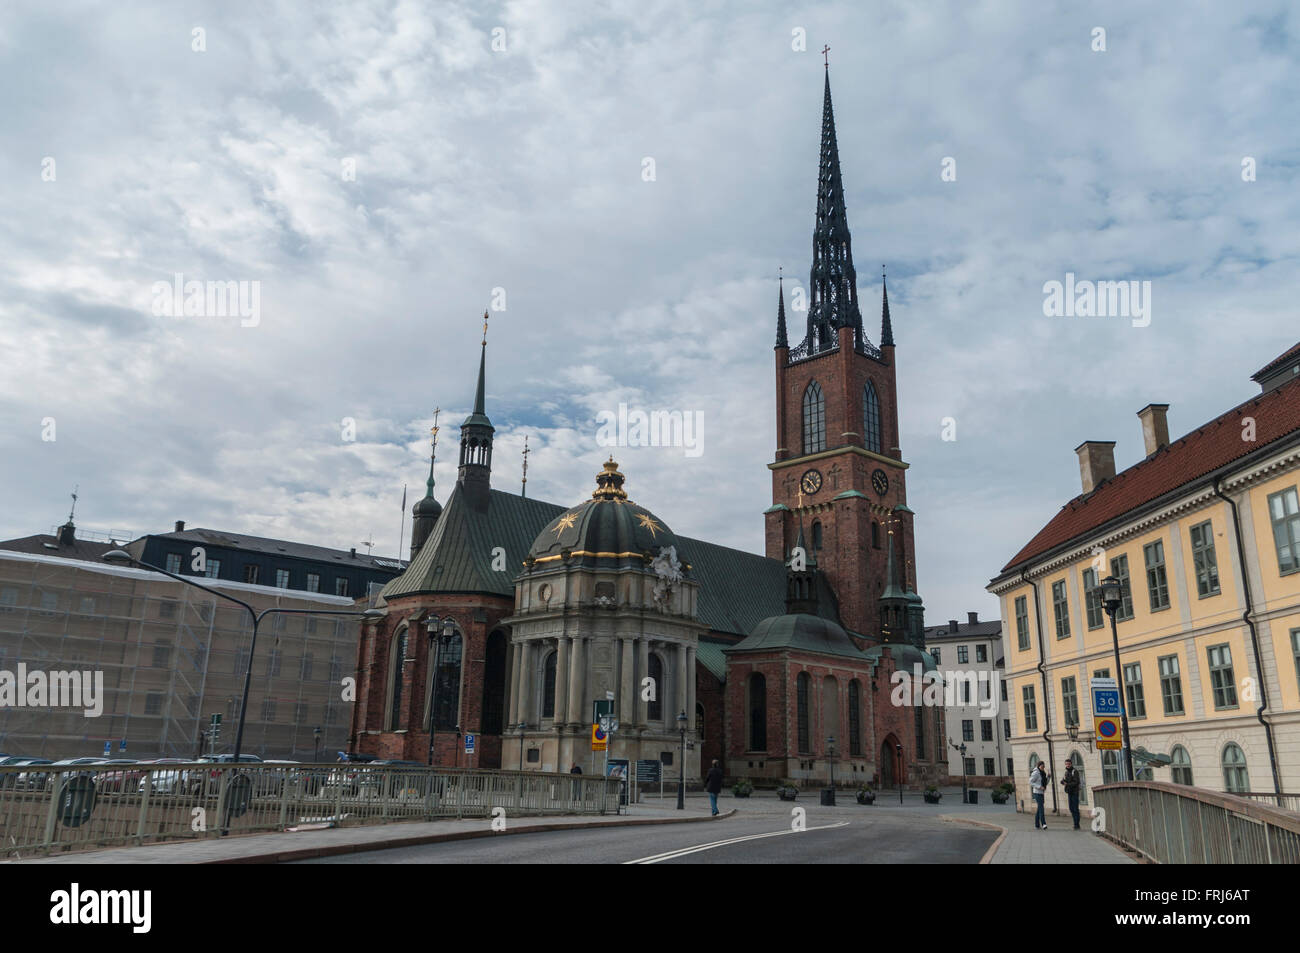 Gothic Riddarholmskyrkan church with its distinctive cast iron spire in Stockholm, Sweden. Stock Photo